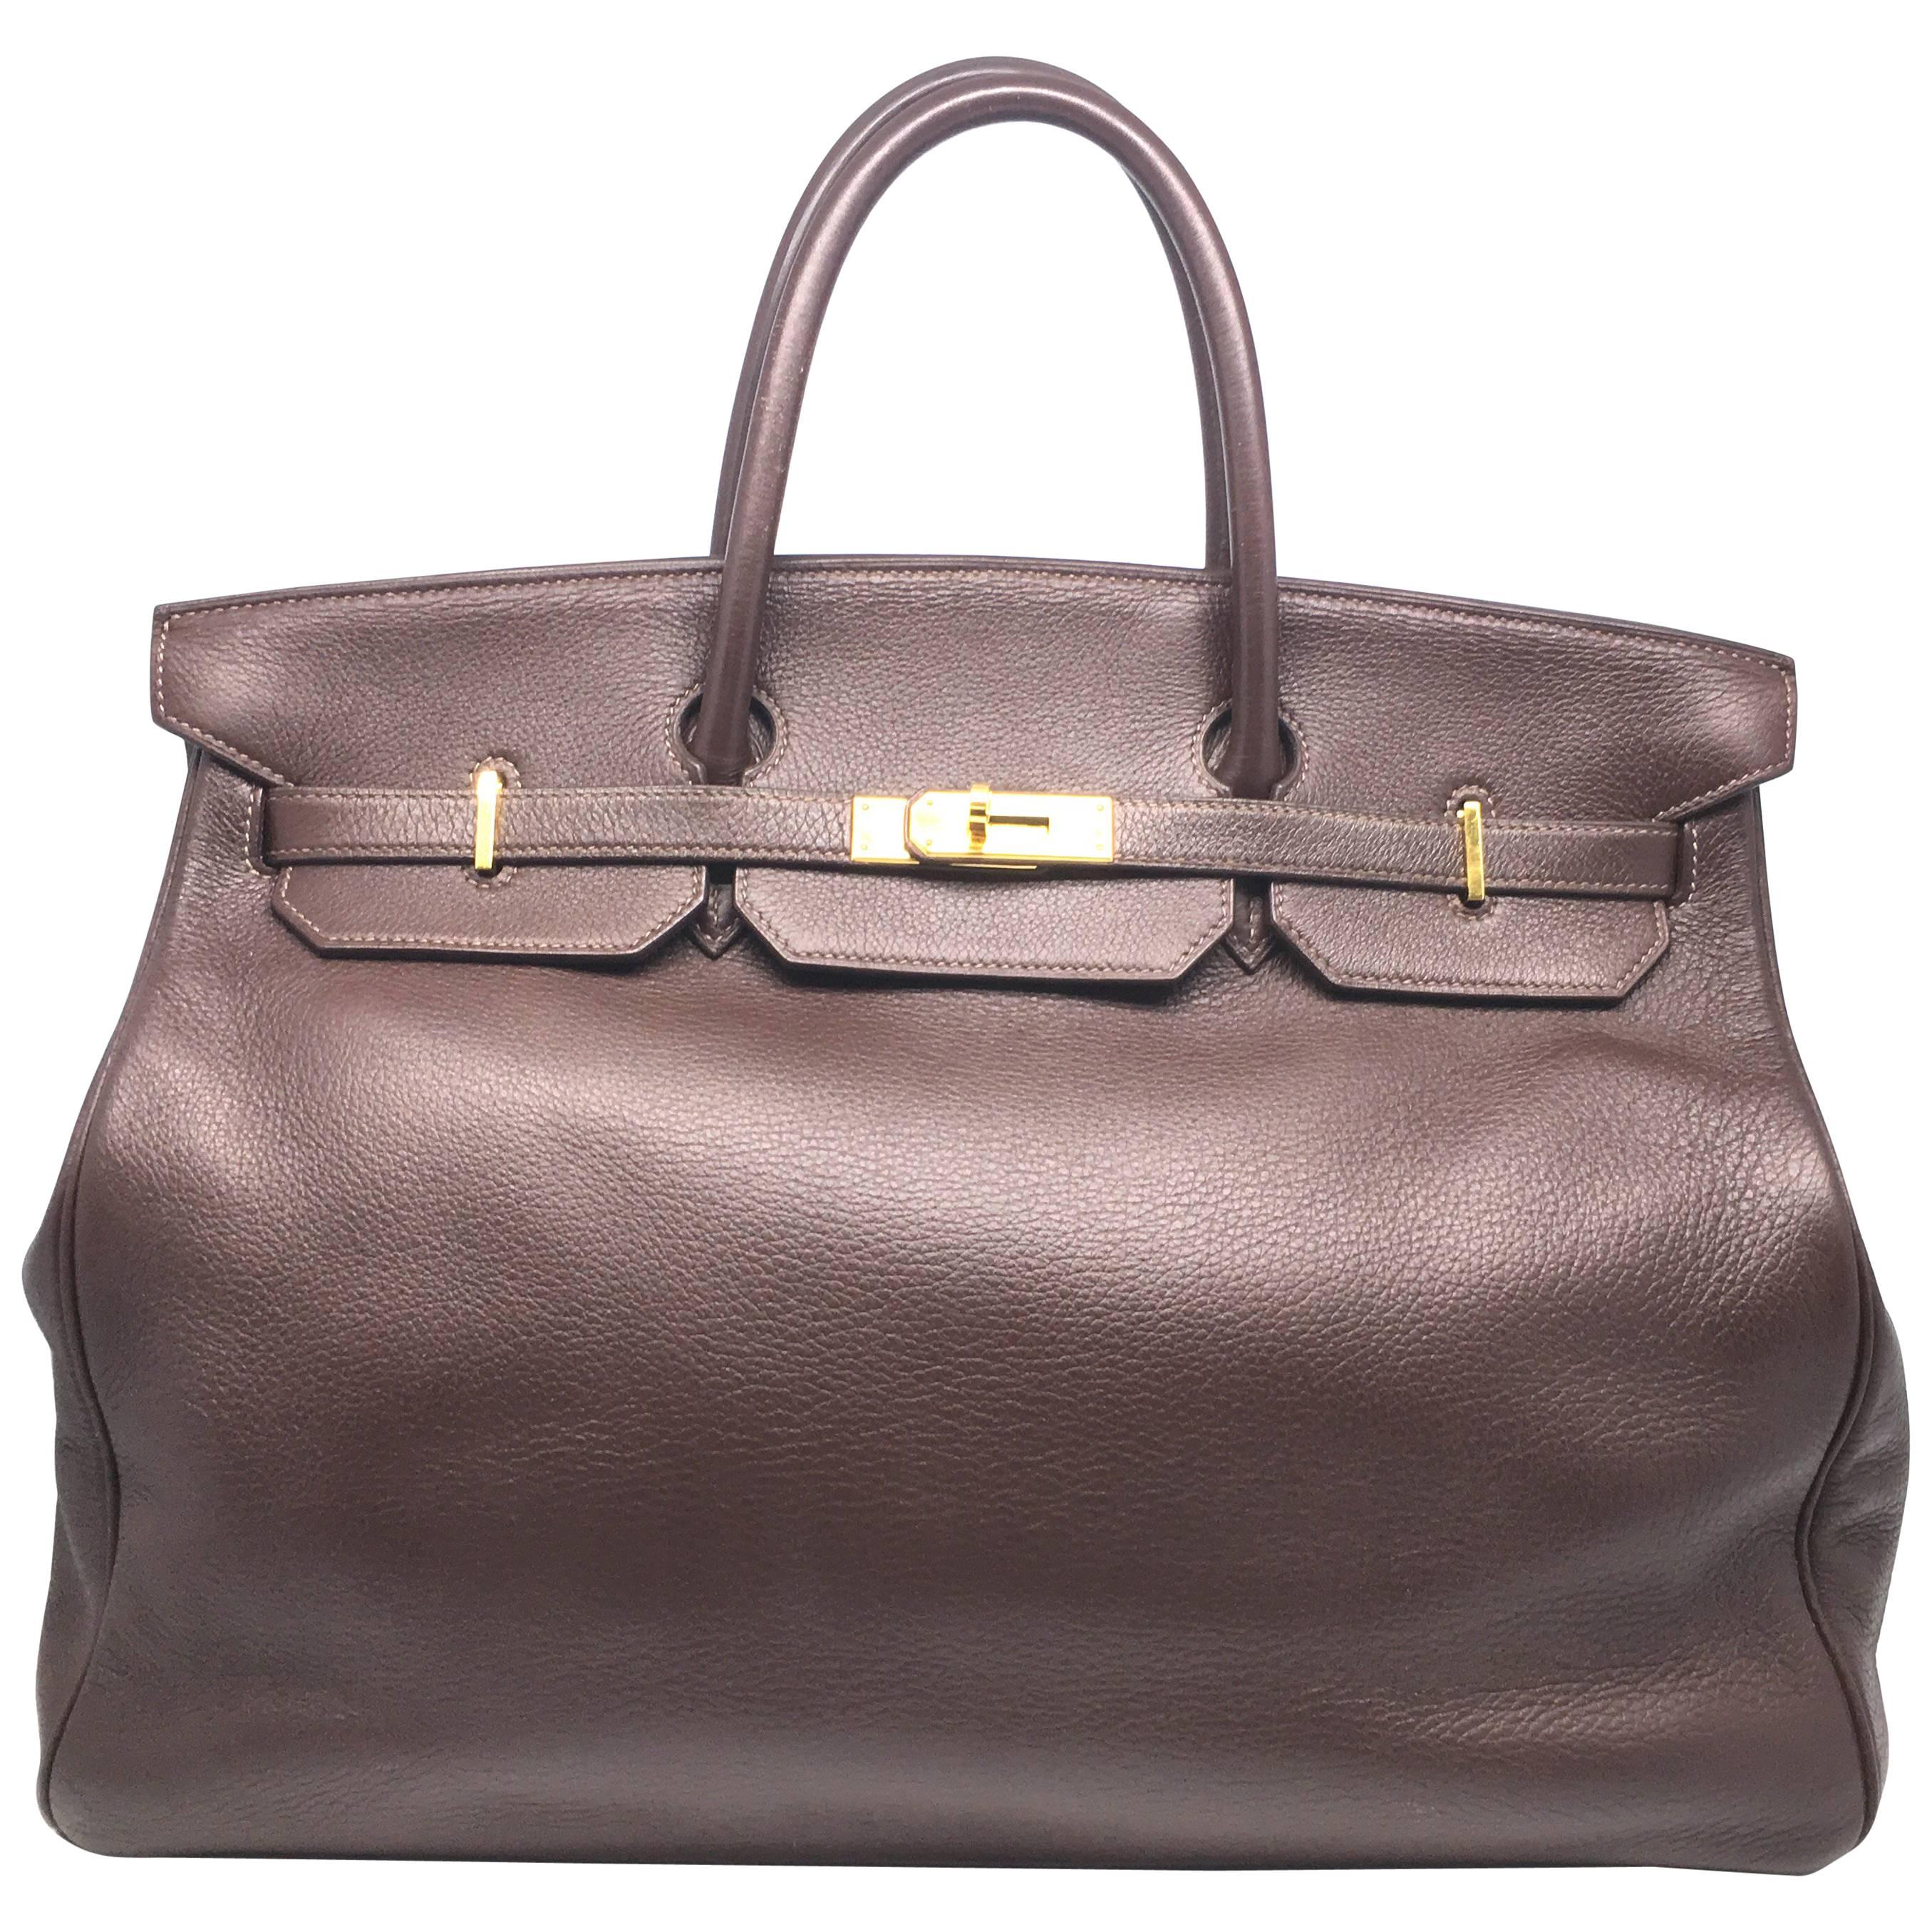 Hermes Birkin 40 Chocolat Taurillon Clemence Leather GHW Top Handle Bag For Sale